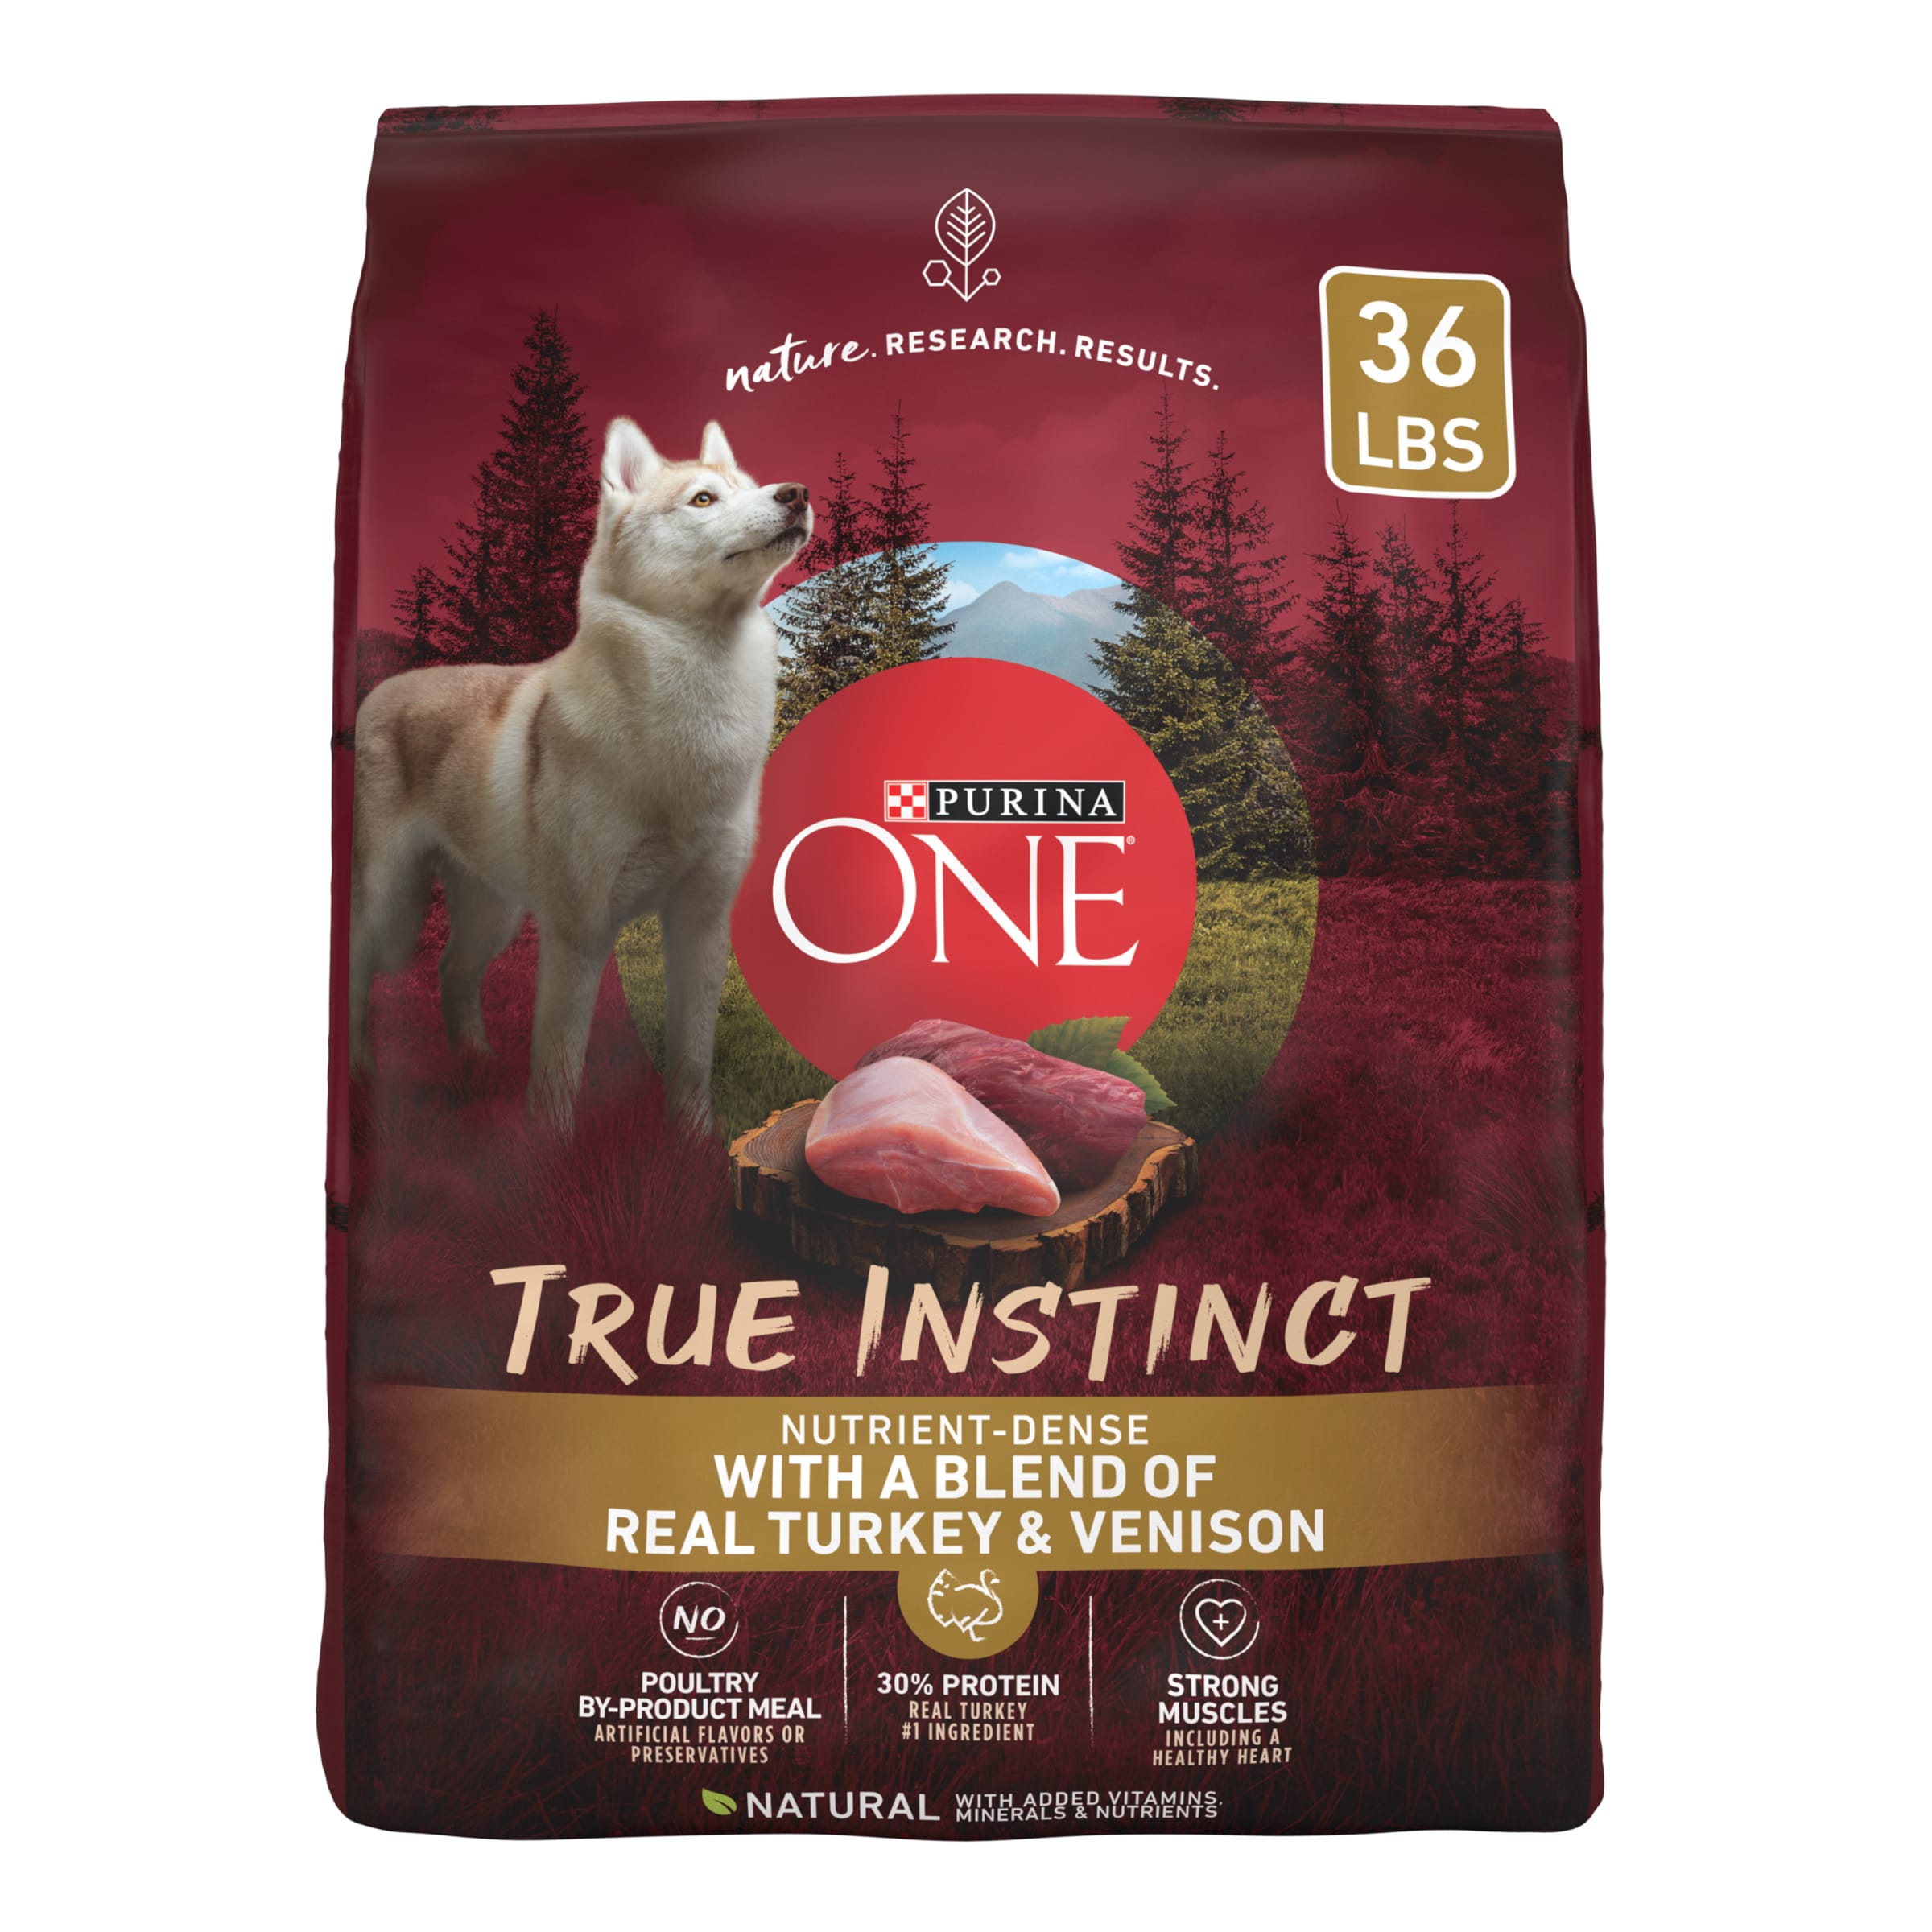 Purina One True Instinct Dry Dog Food for Adult Dogs, Real Turkey & Venison, 36 lb Bag - image 1 of 10